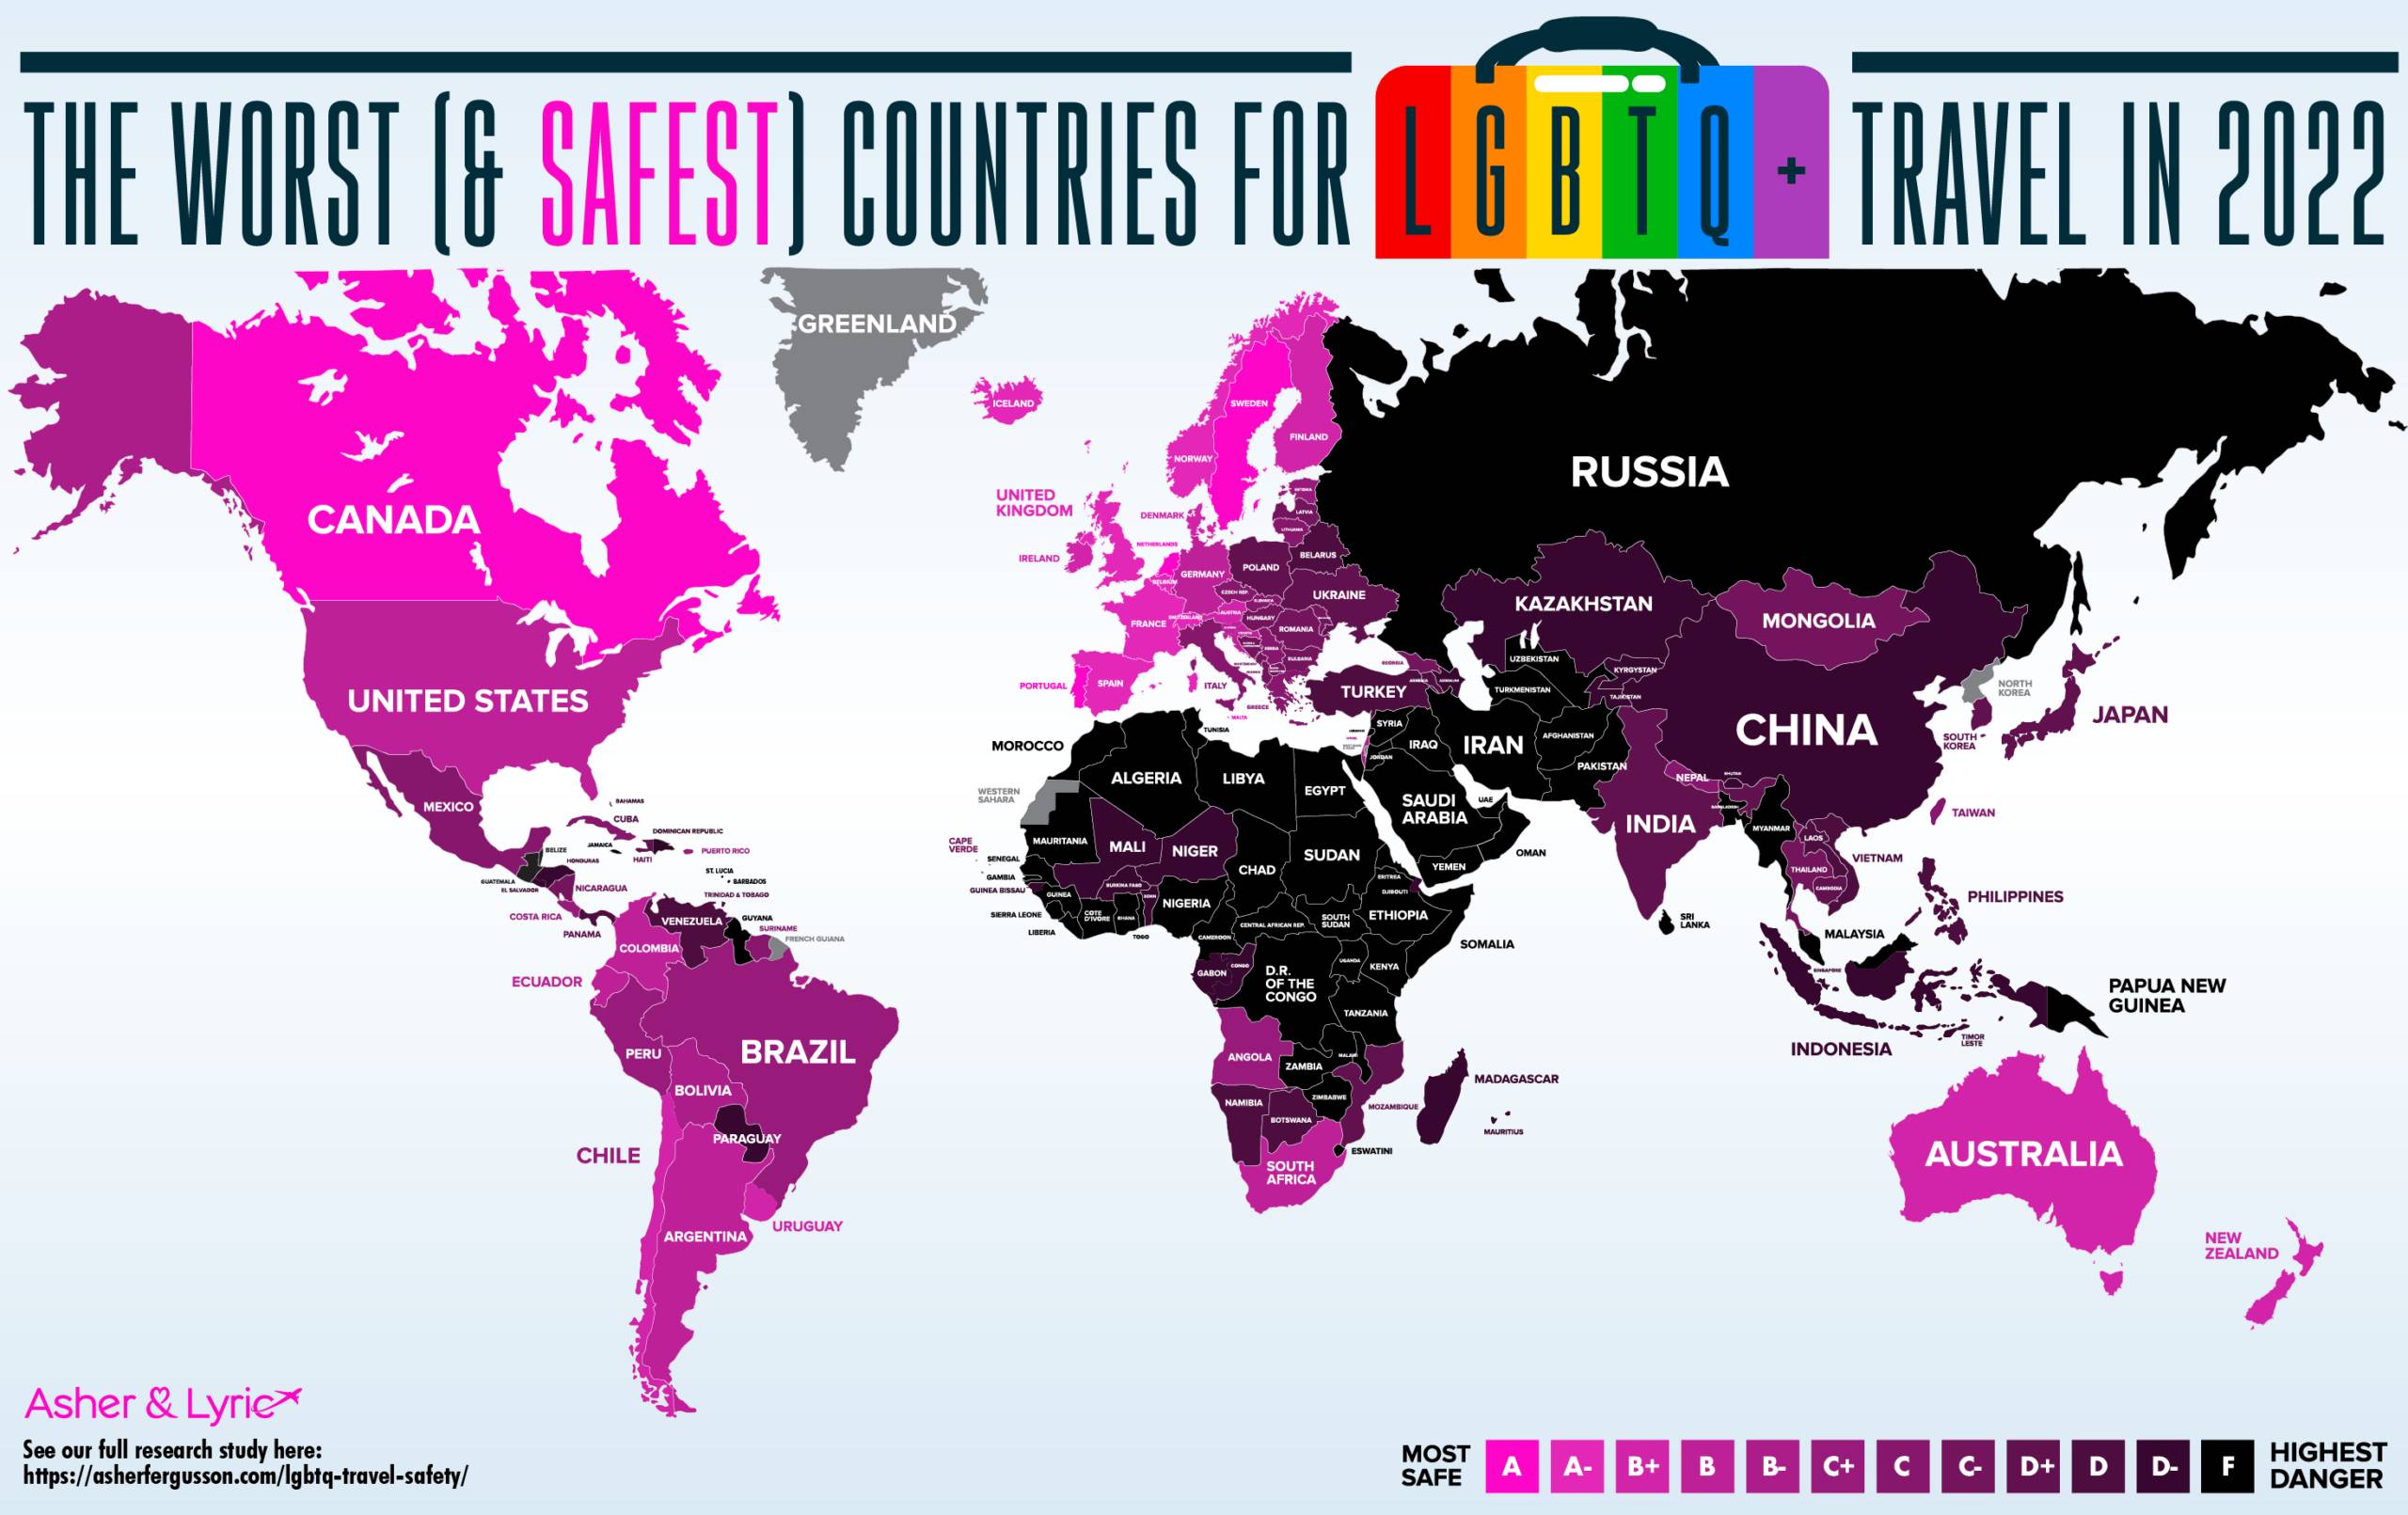 REVEALED: The Worst & Safest Destinations for LGBTQ+ Travelers in 2022.